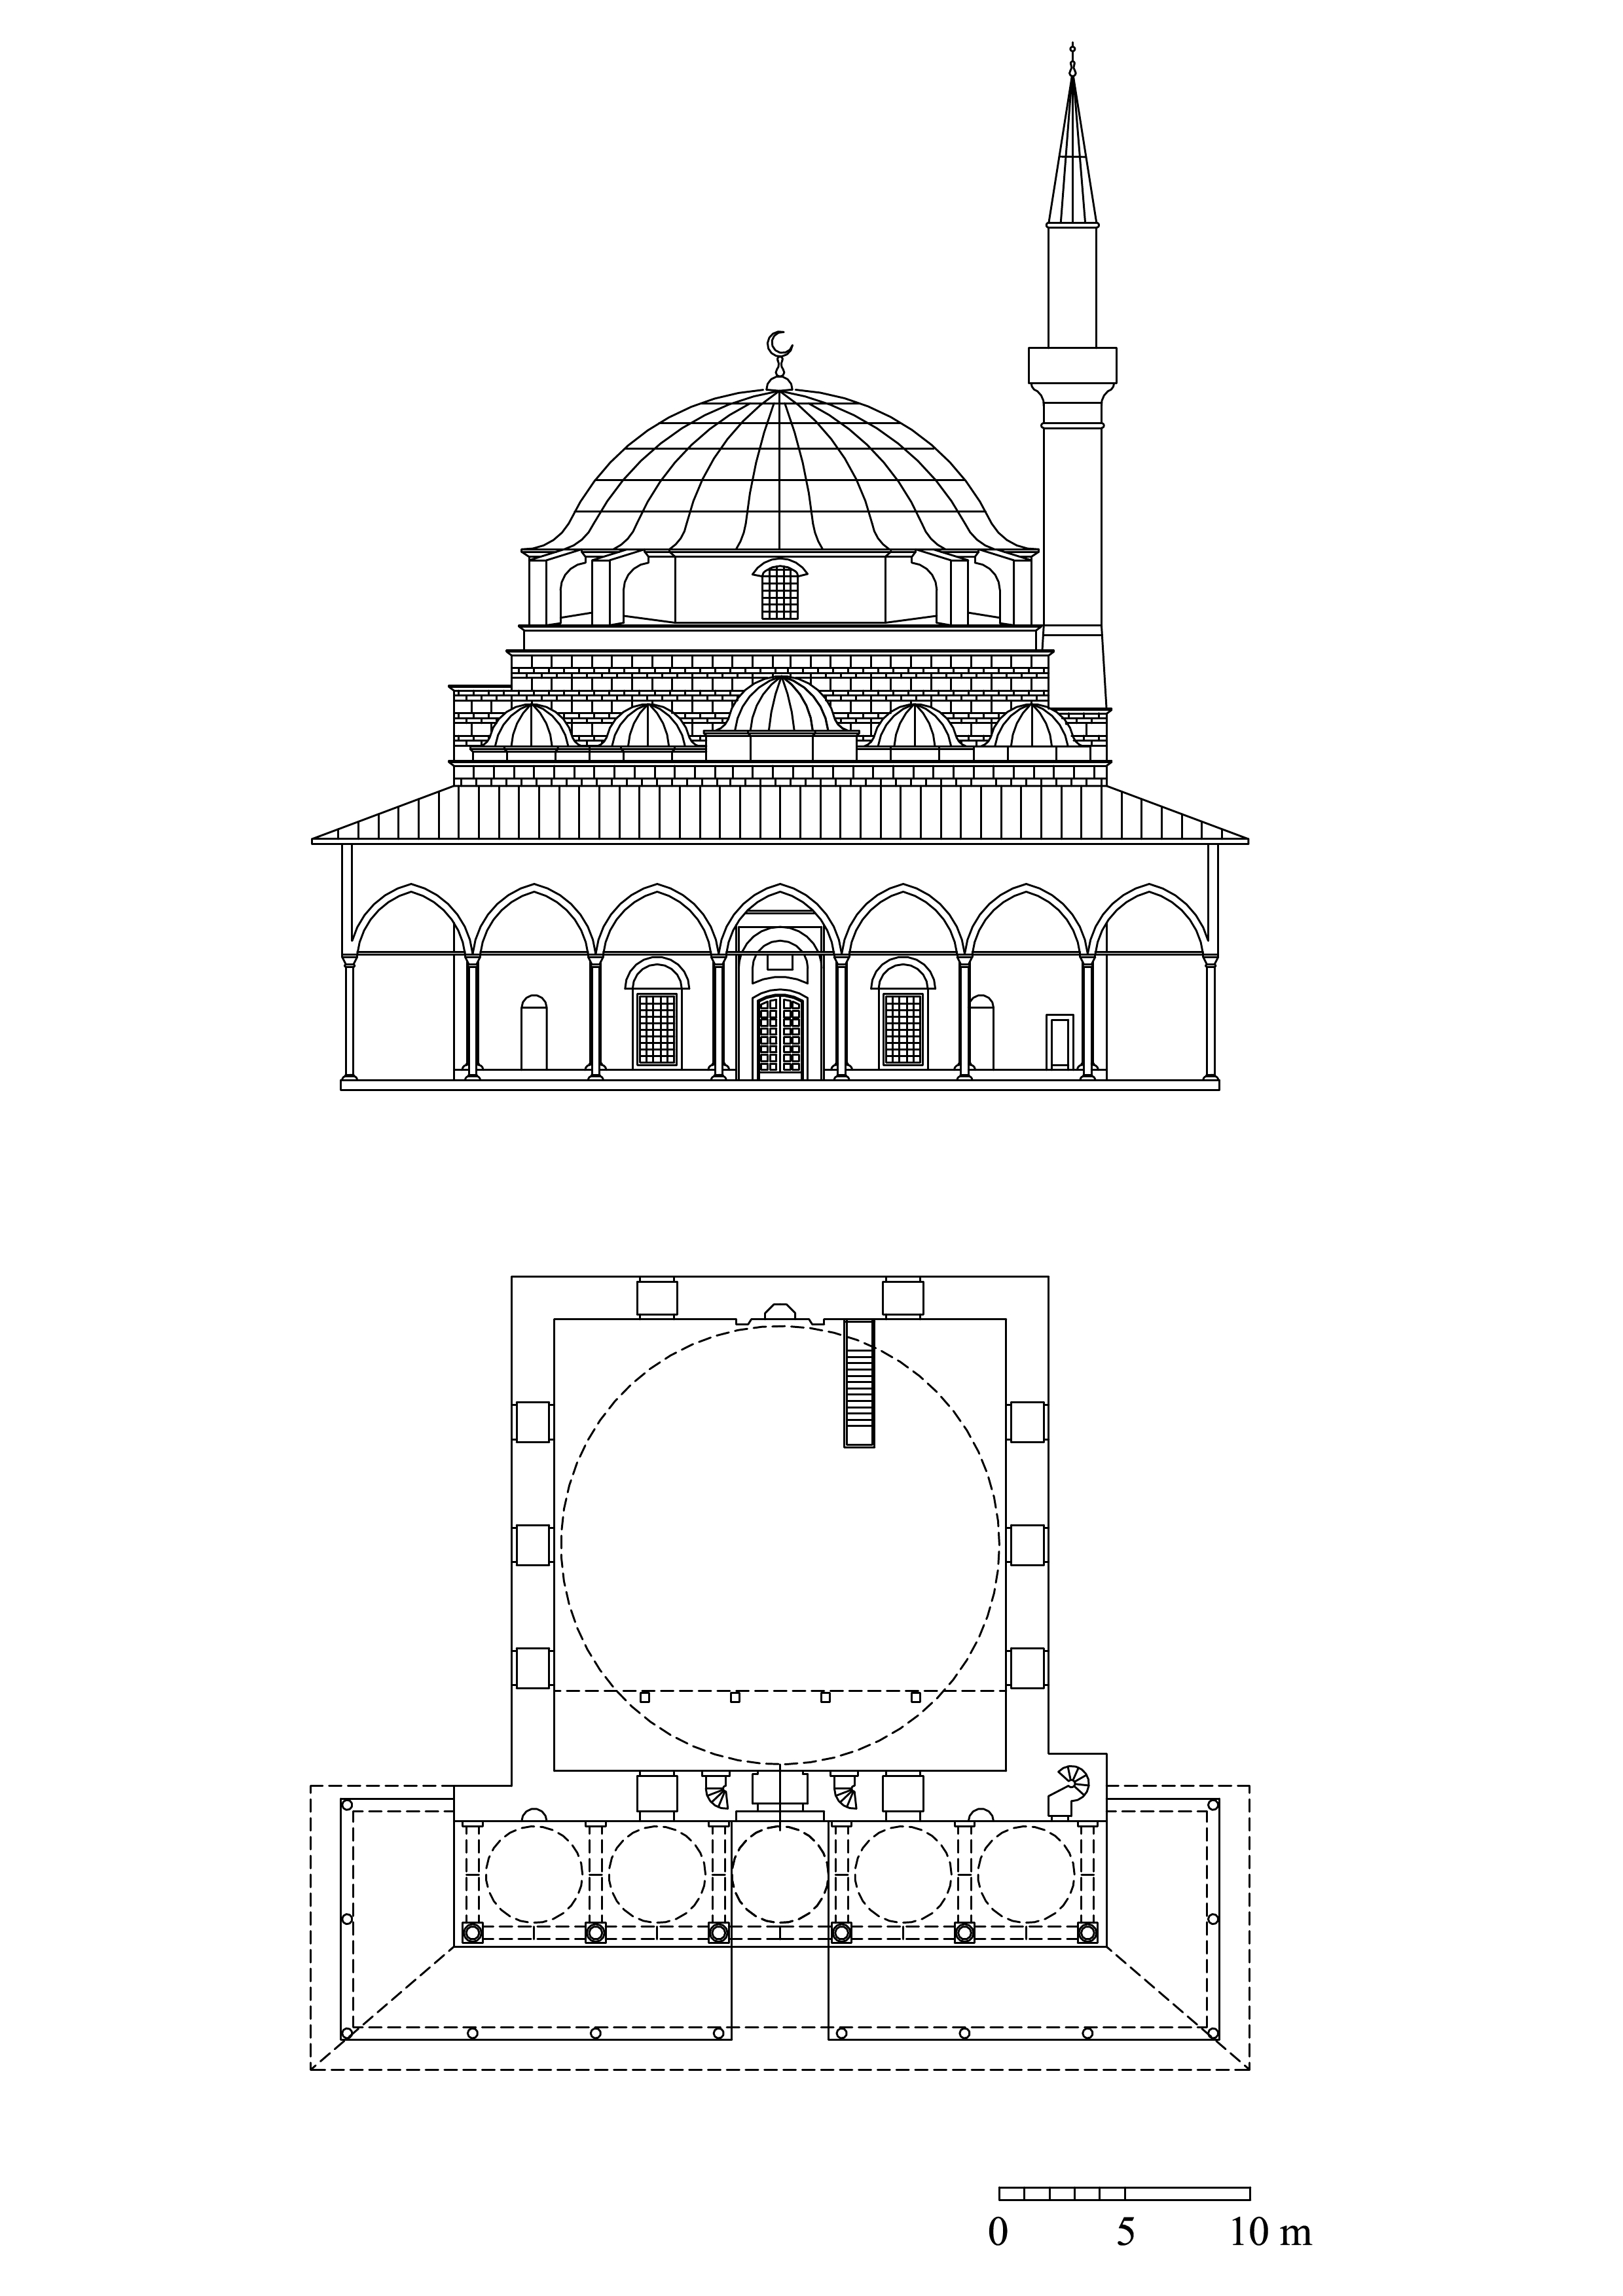 Floor plan and elevation showing the missing double portico (hypothetical reconstruction)